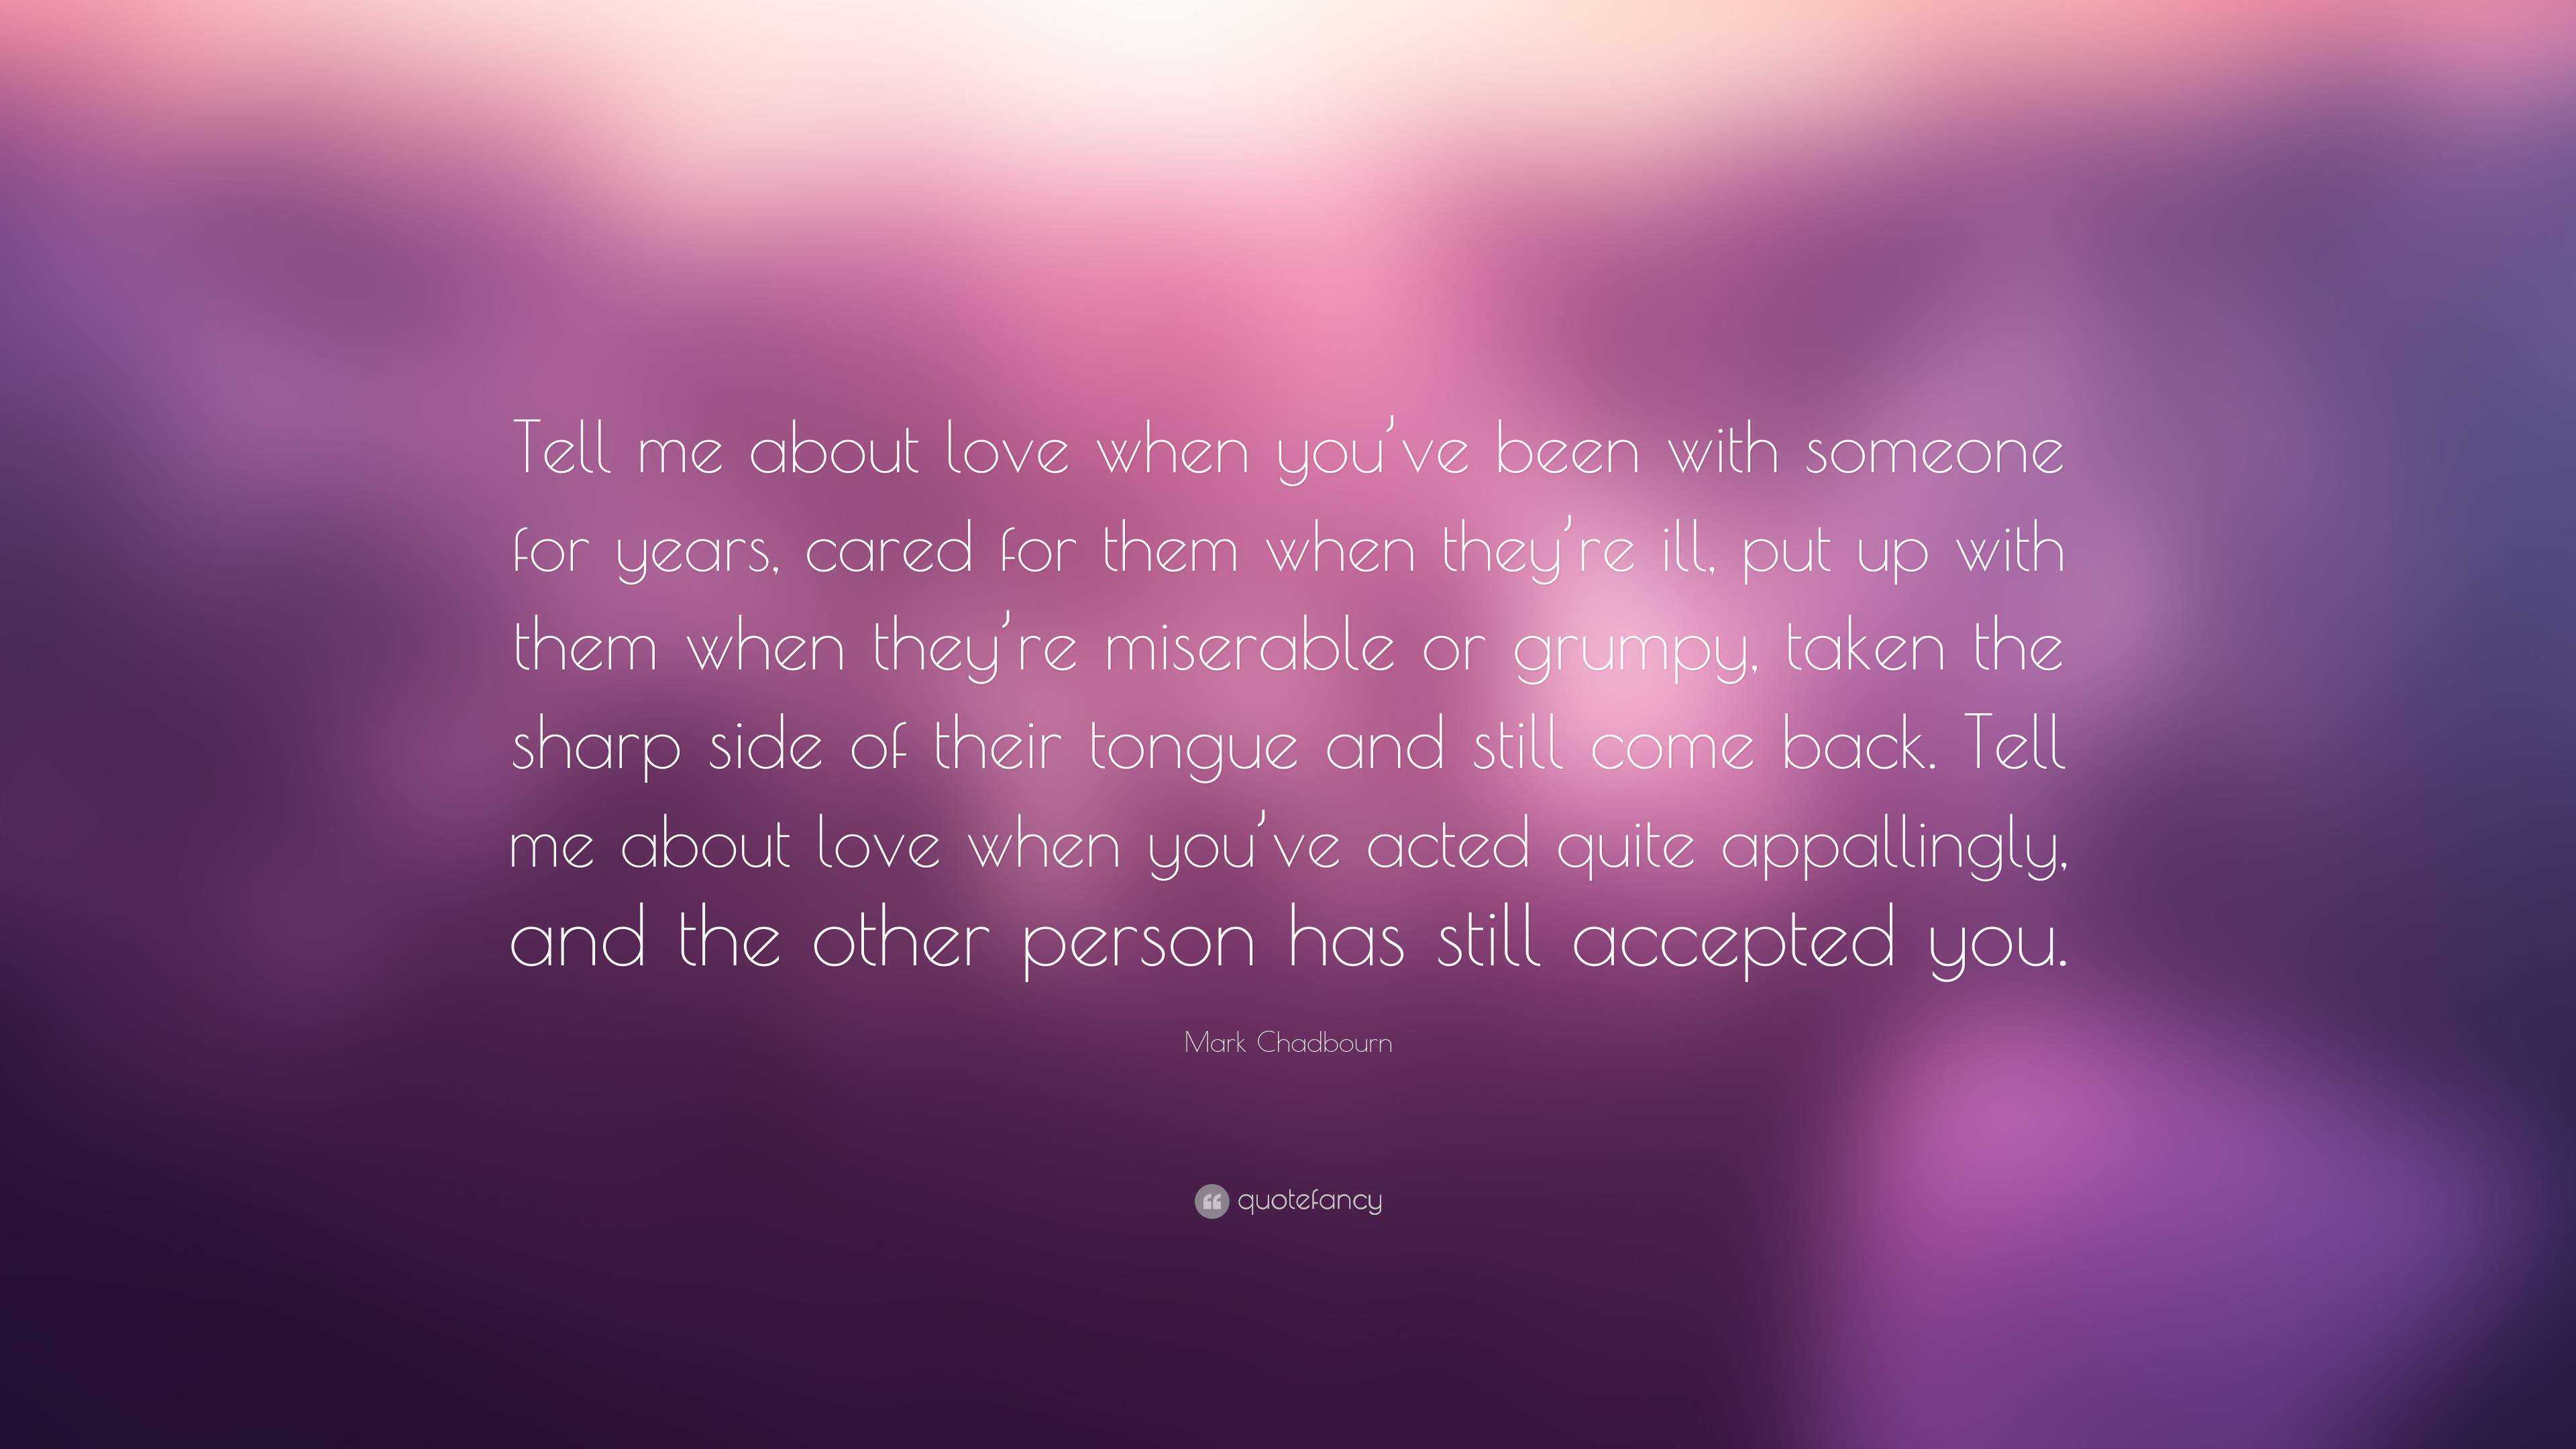 Mark Chadbourn Quote: “Tell me about love when you’ve been with someone ...